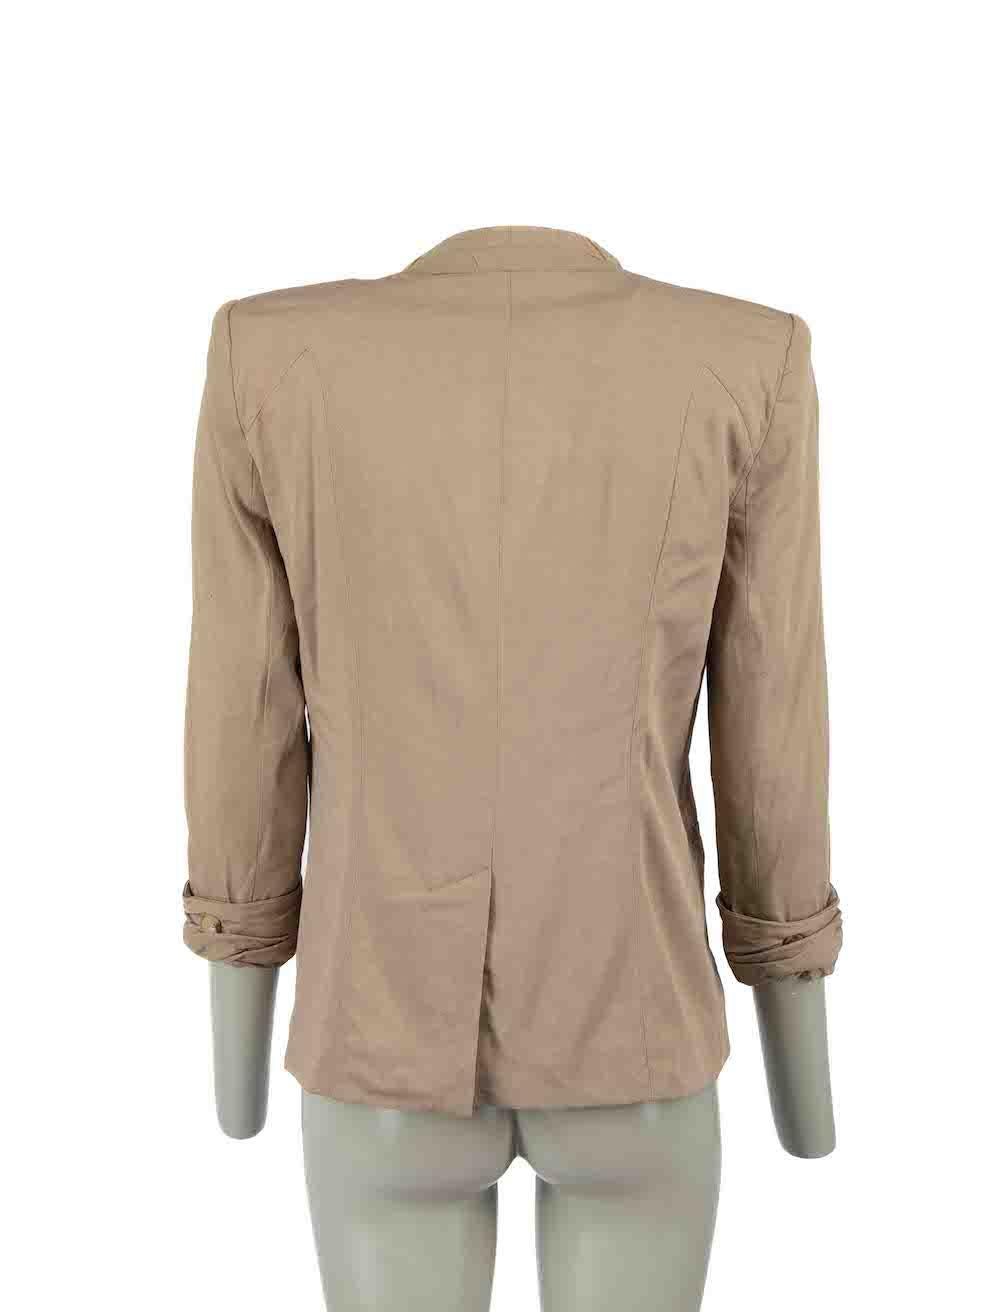 Helmut Lang Beige Double Breasted Blazer Size XS In Excellent Condition For Sale In London, GB